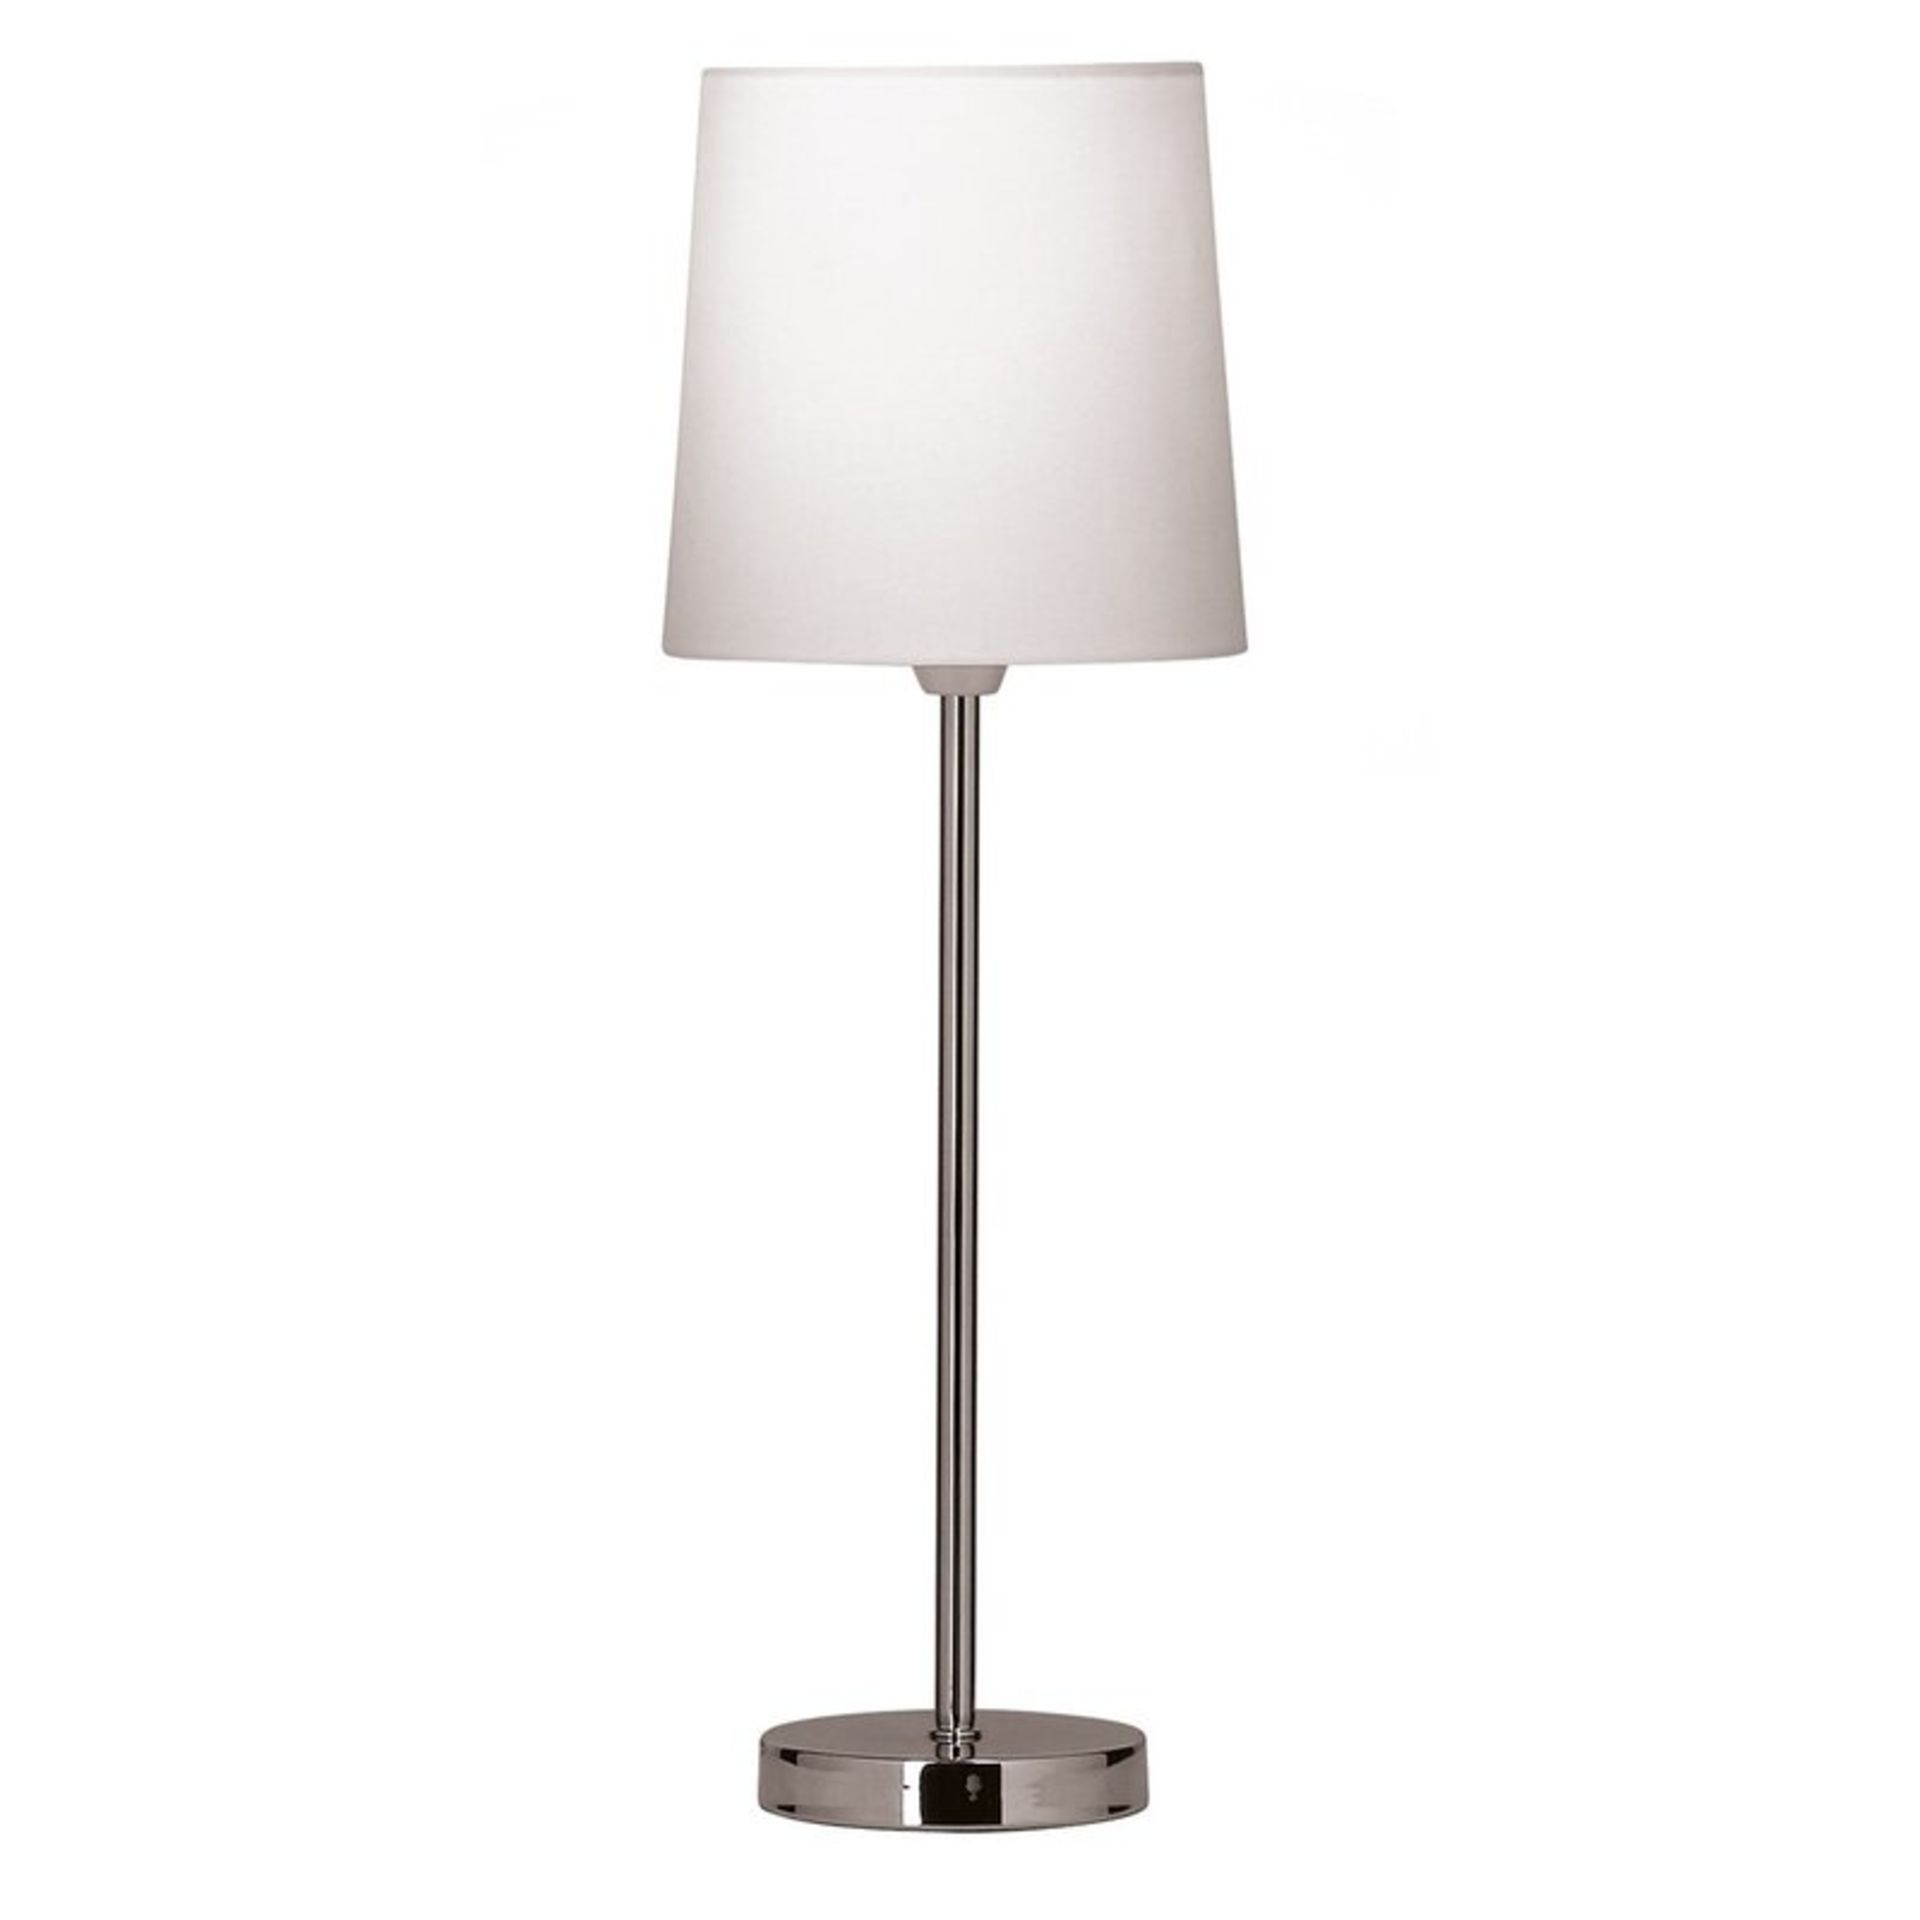 2 x Witzel 50cm Table Lamp complete with